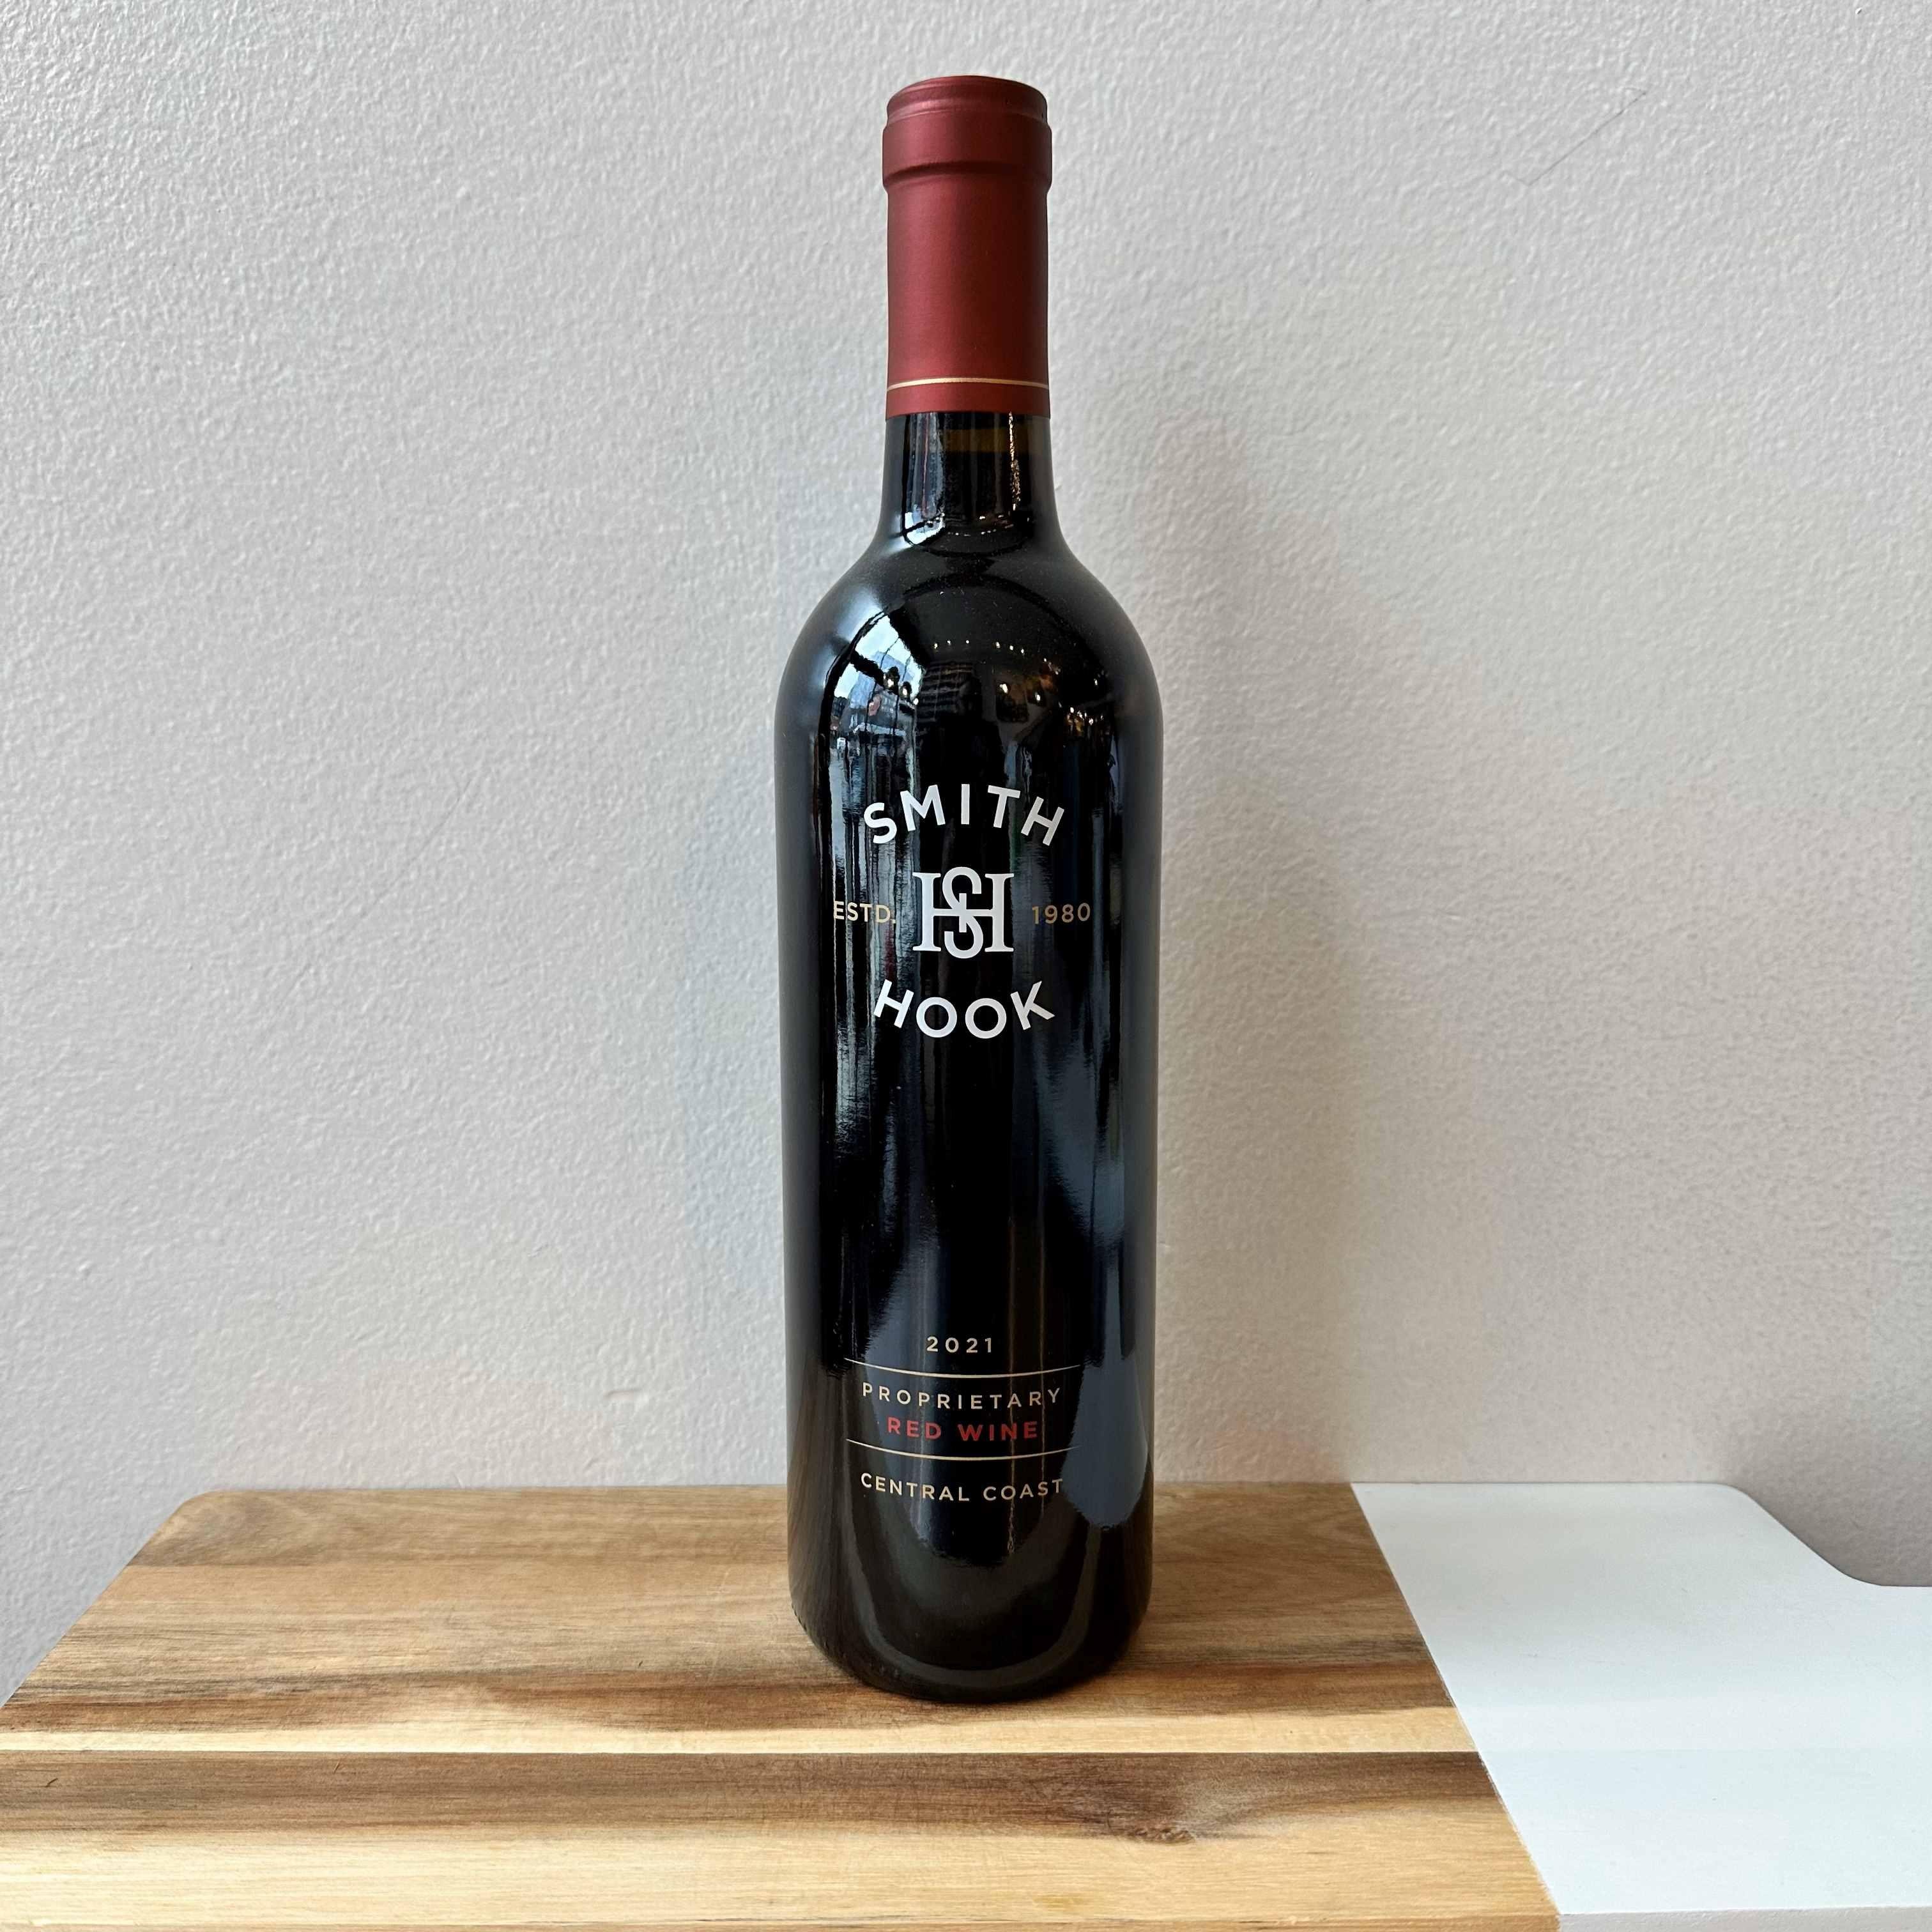 Smith & Hook "Proprietary" Red Blend 2021 California